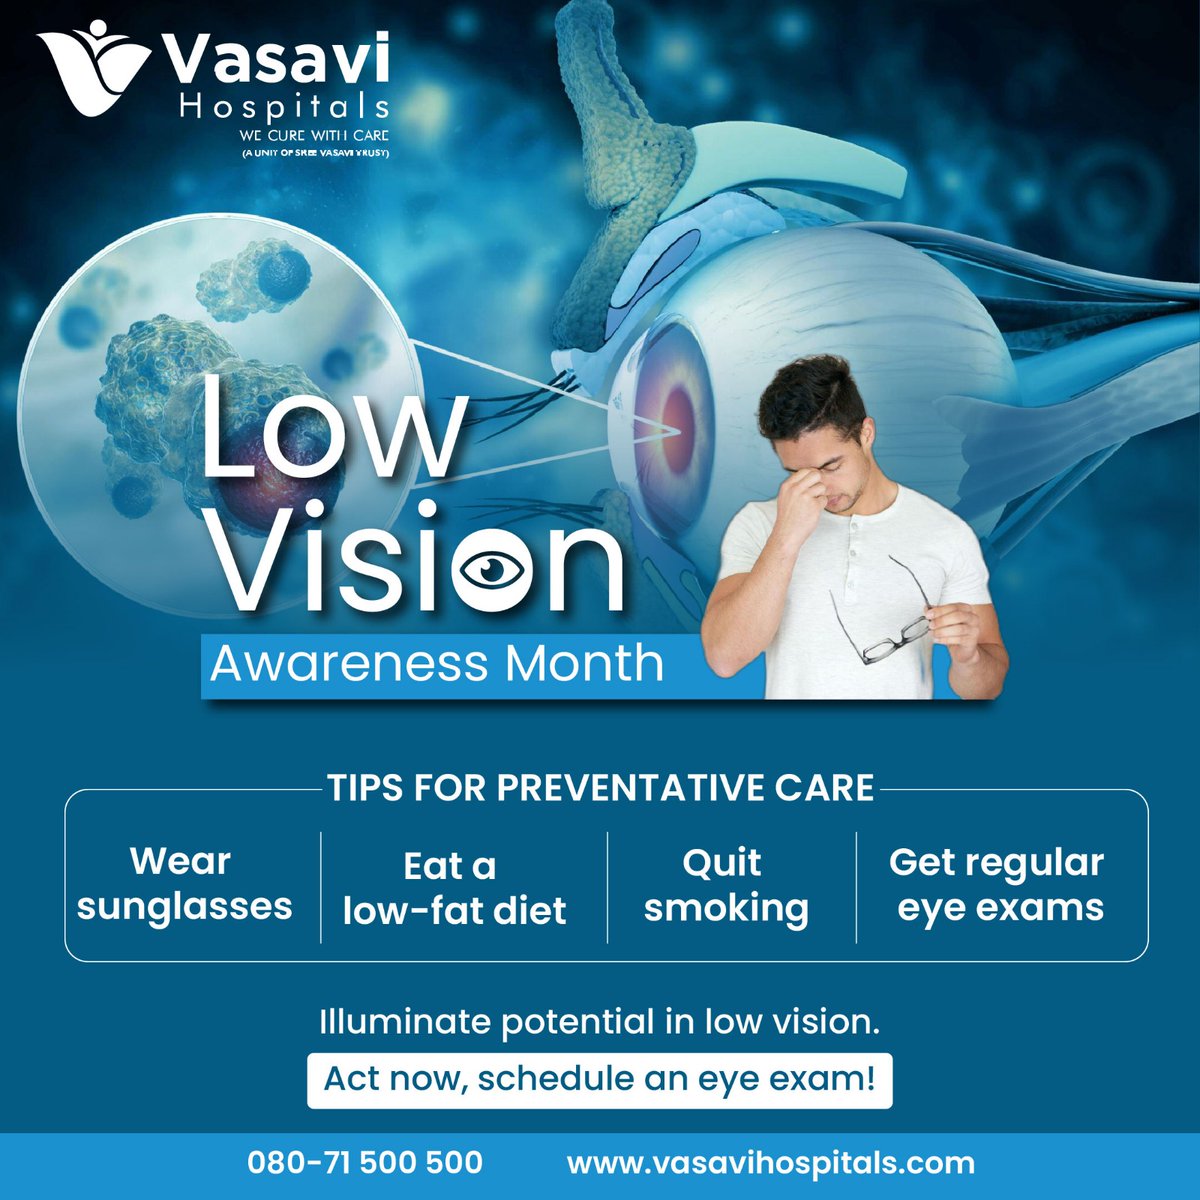 Embrace clarity this Low Vision Awareness Month with Vasavi Hospitals! 
Schedule your eye exam at Vasavi Hospitals.   #LowVisionAwareness #EyeHealth #vasavihospitals   #VasaviHospitalsbangalore #VasaviHospital #Healthcarebangalore #MedicalExcellence  #MultiSpecialtyCare